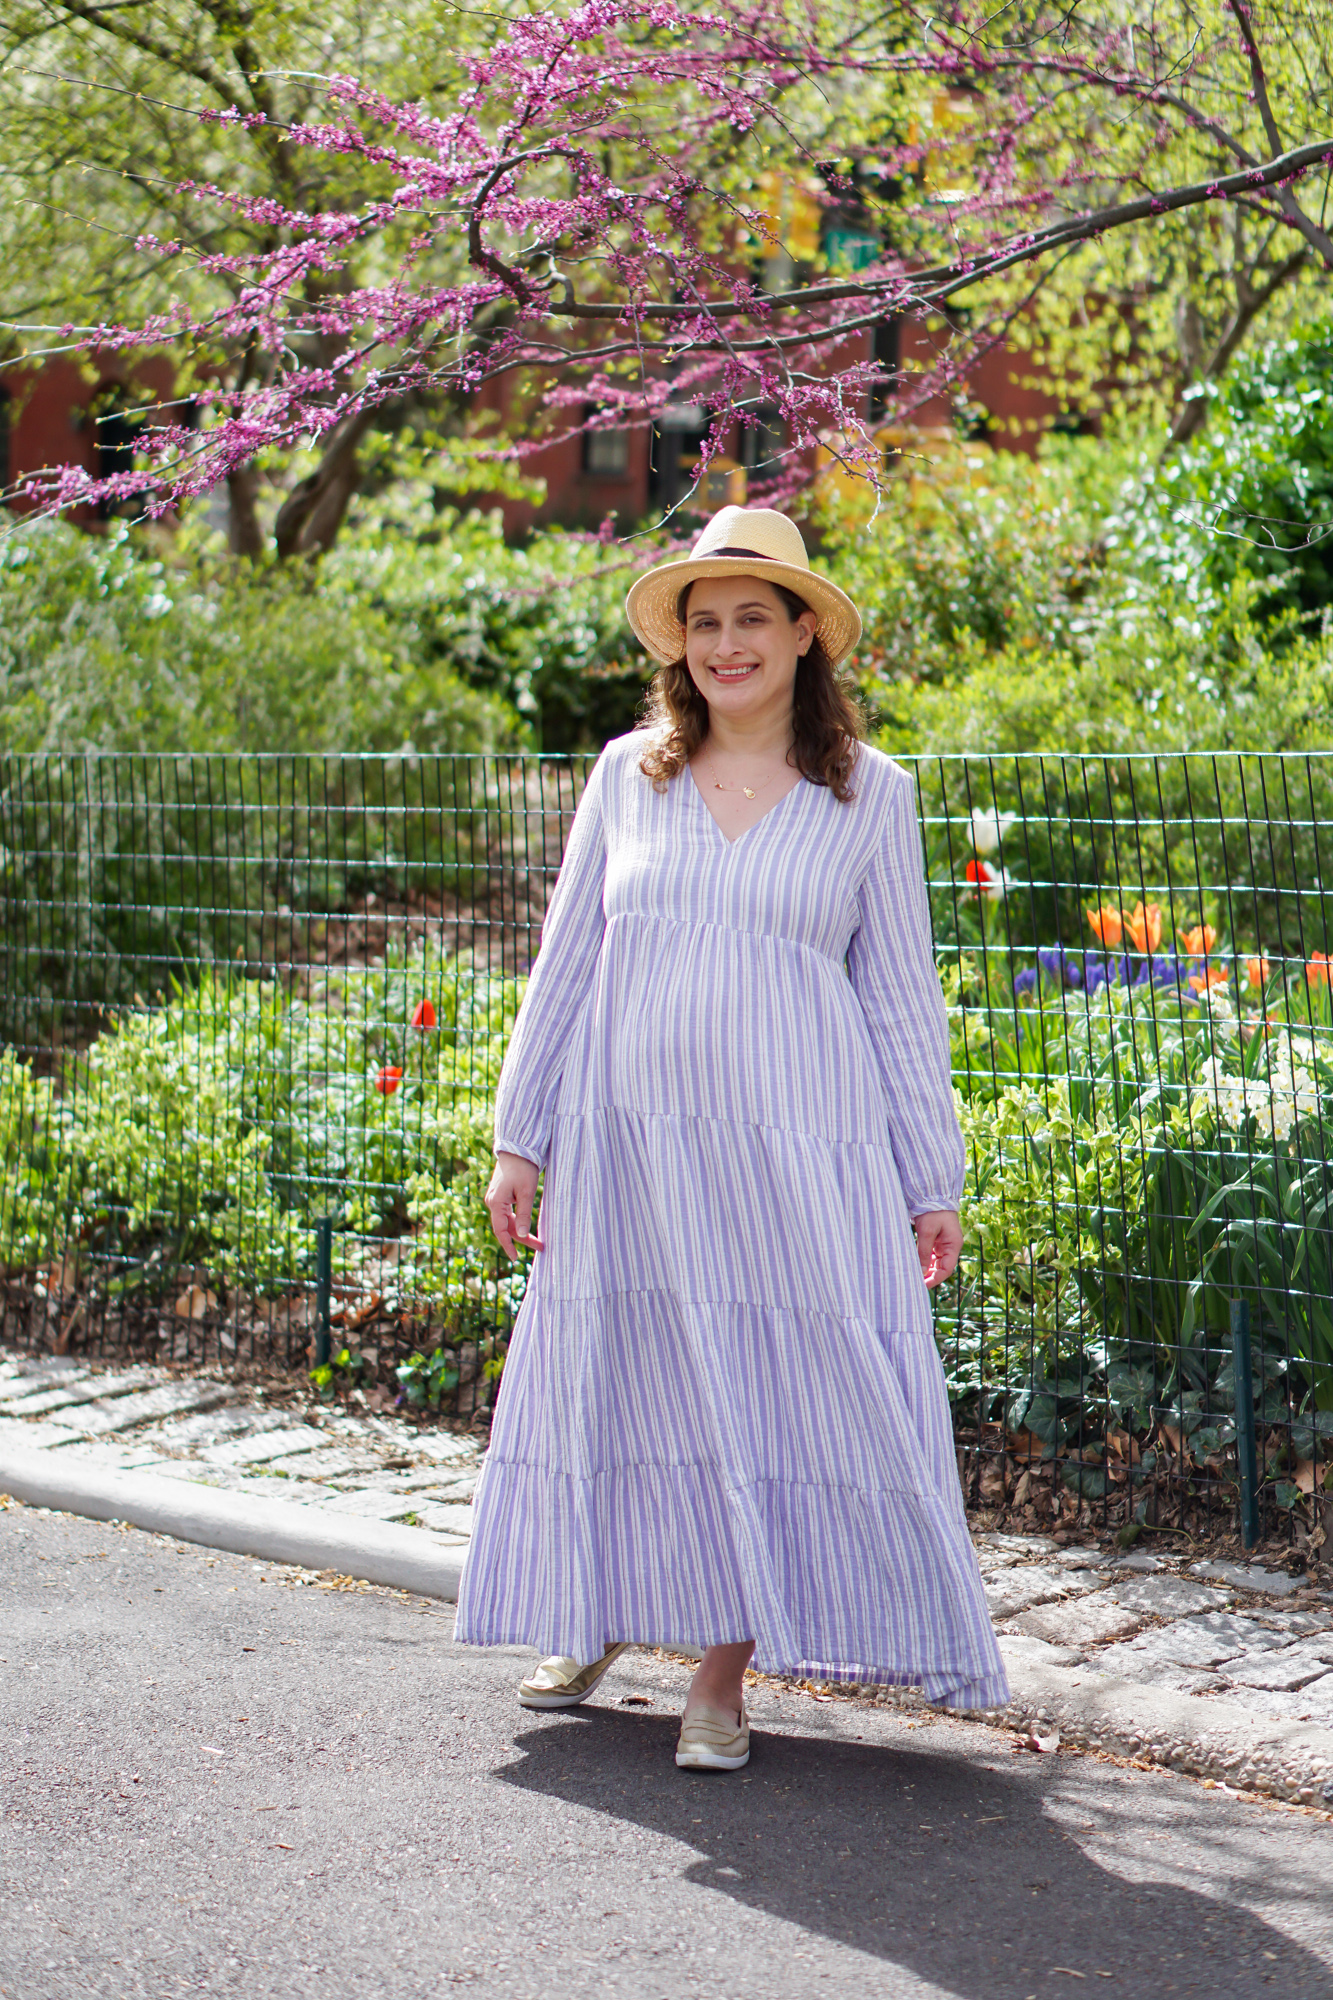 How to style a maxi dress for spring